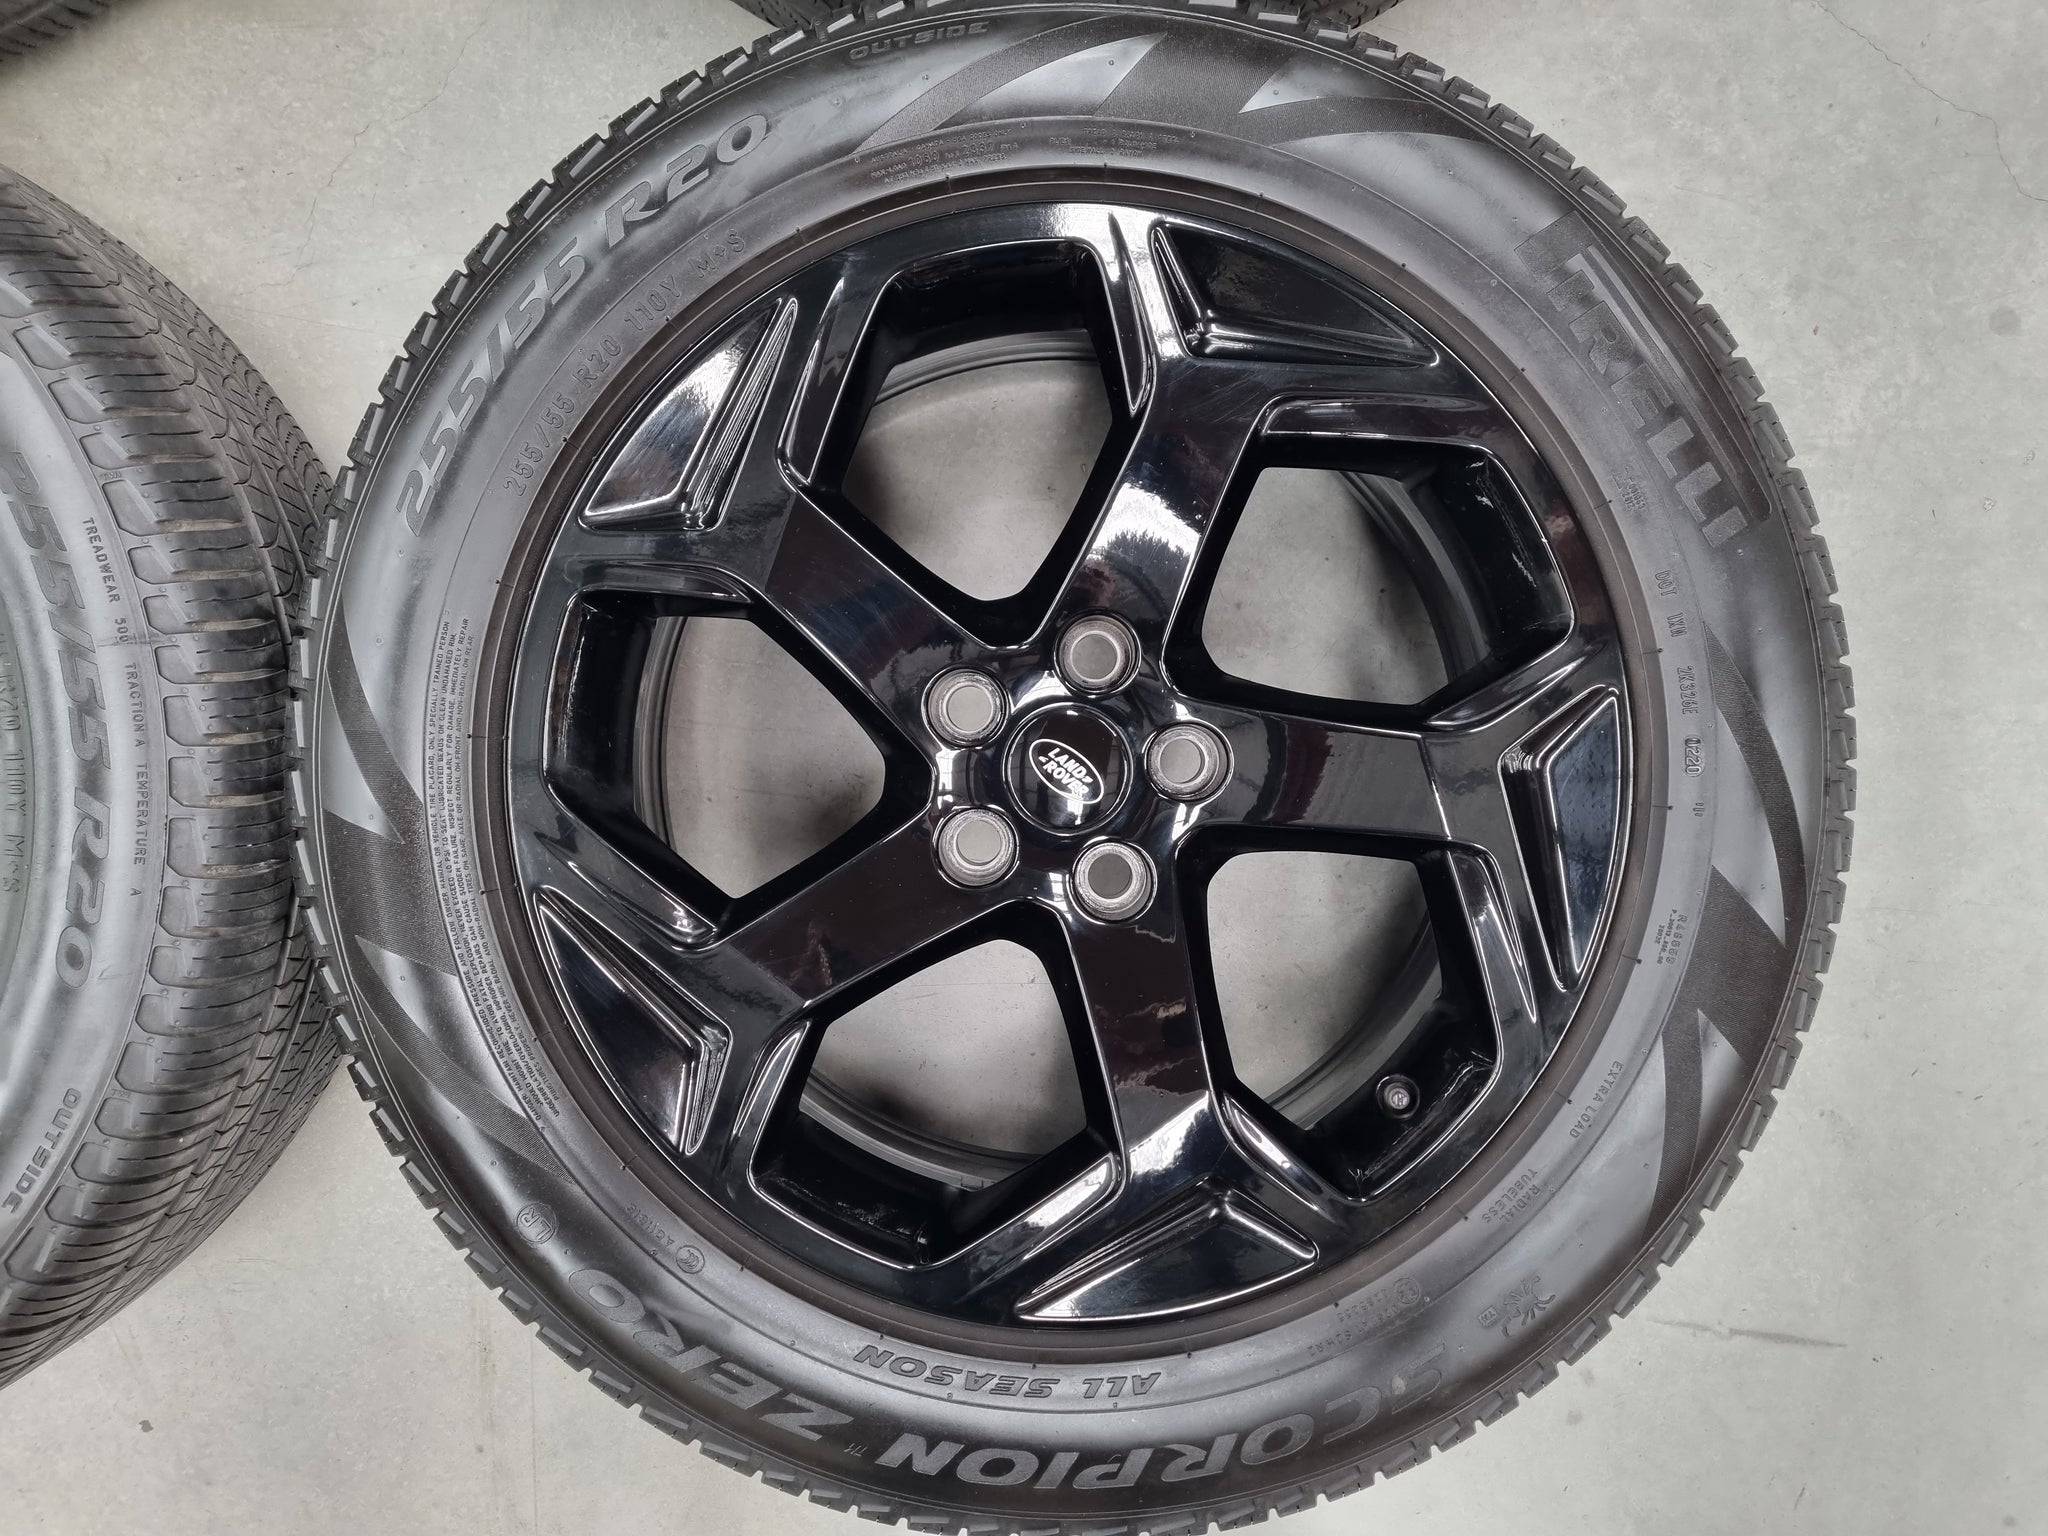 Load image into Gallery viewer, Genuine Range Rover Sport 2021 20 Inch Wheels and Tyres Set of 4
